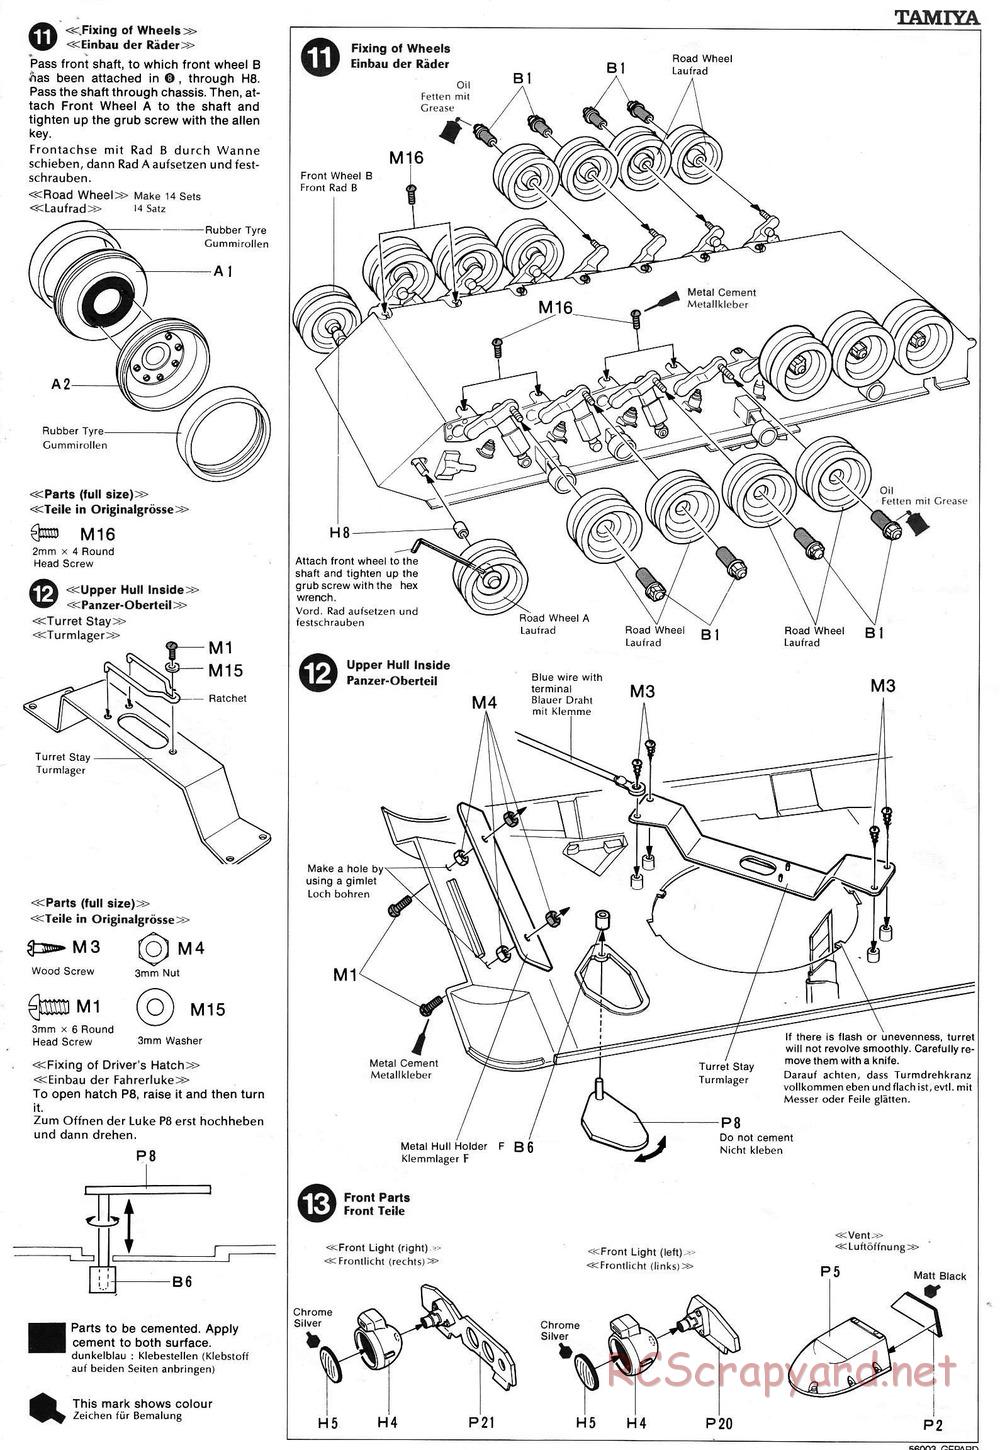 Tamiya - Flakpanzer Gepard - 1/16 Scale Chassis - Manual - Page 7